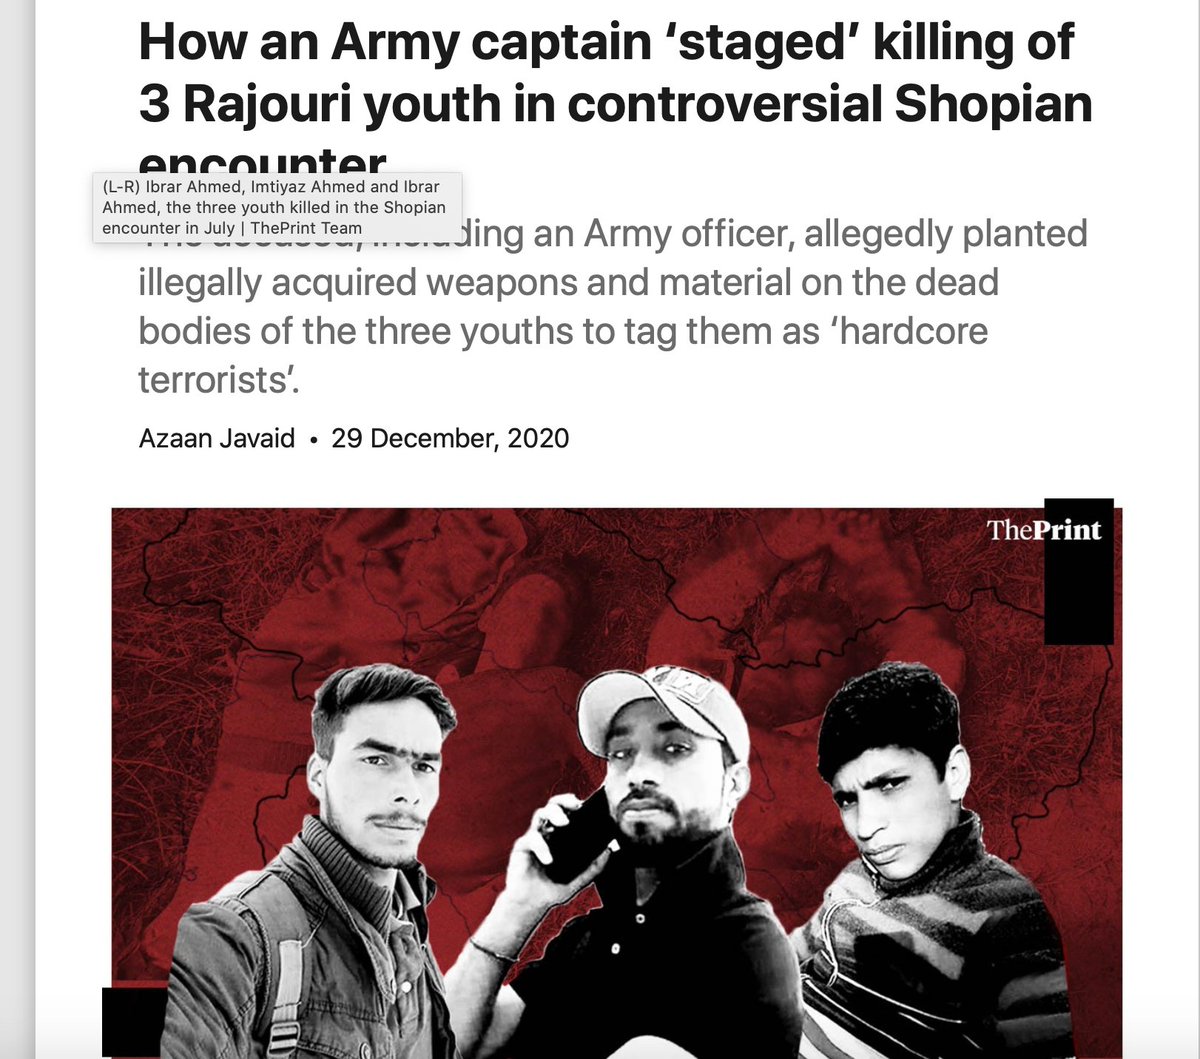 Will even a fraction of the time devoted on TV to mourning Sushant Singh Rajput and demanding justice for him, be devoted to mourning 16 year-old Ibrar Ahmed, 20 year-old Ibrar Ahme and 25-year old Imtiyaz Ahmed, killed by an Indian Army officer?